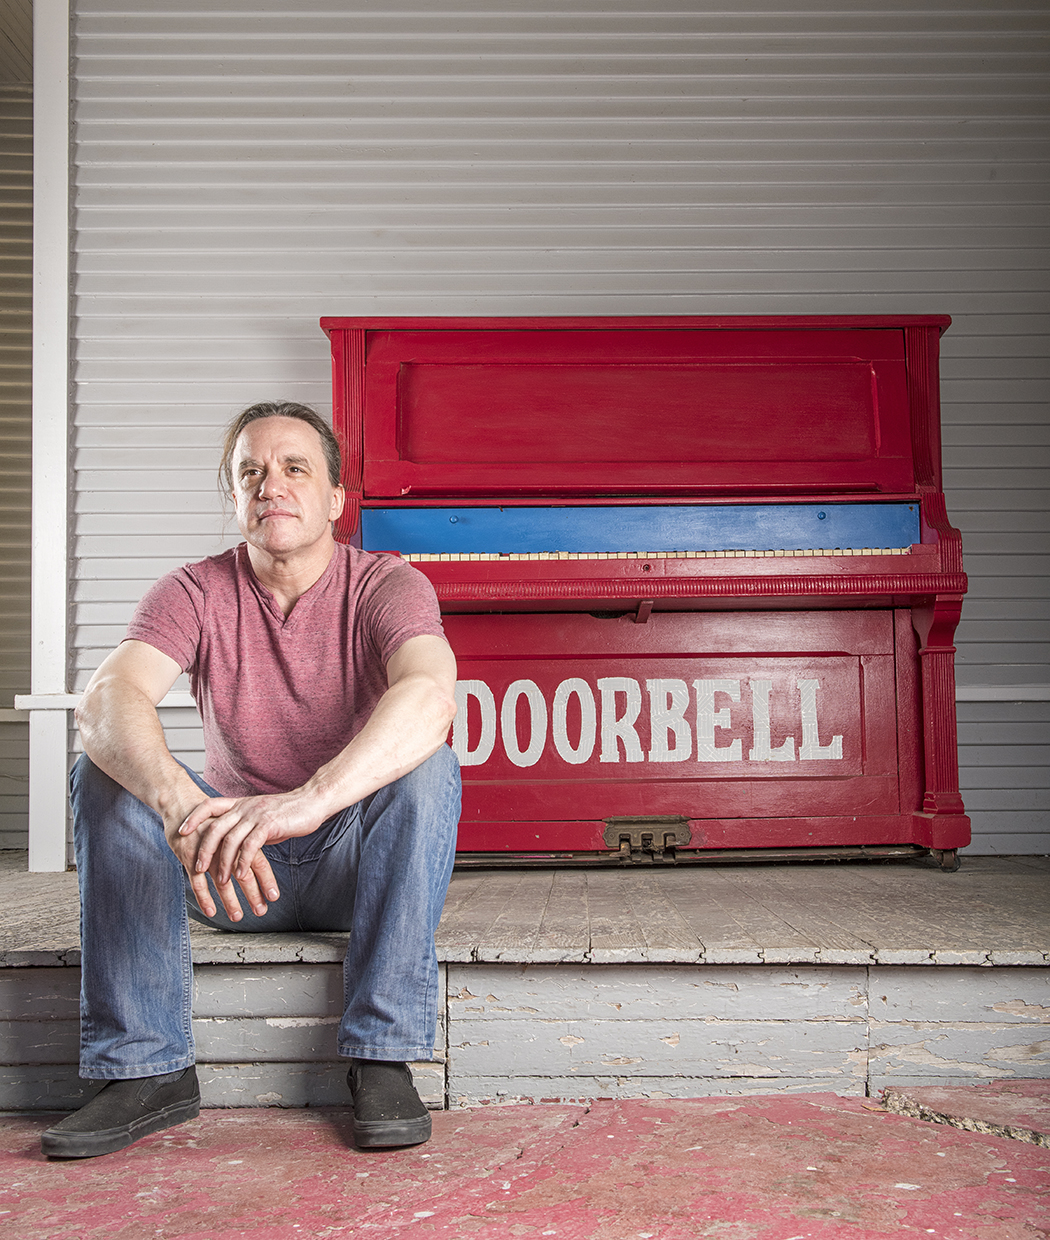 Man in front of piano painted with "doorbell" on it.